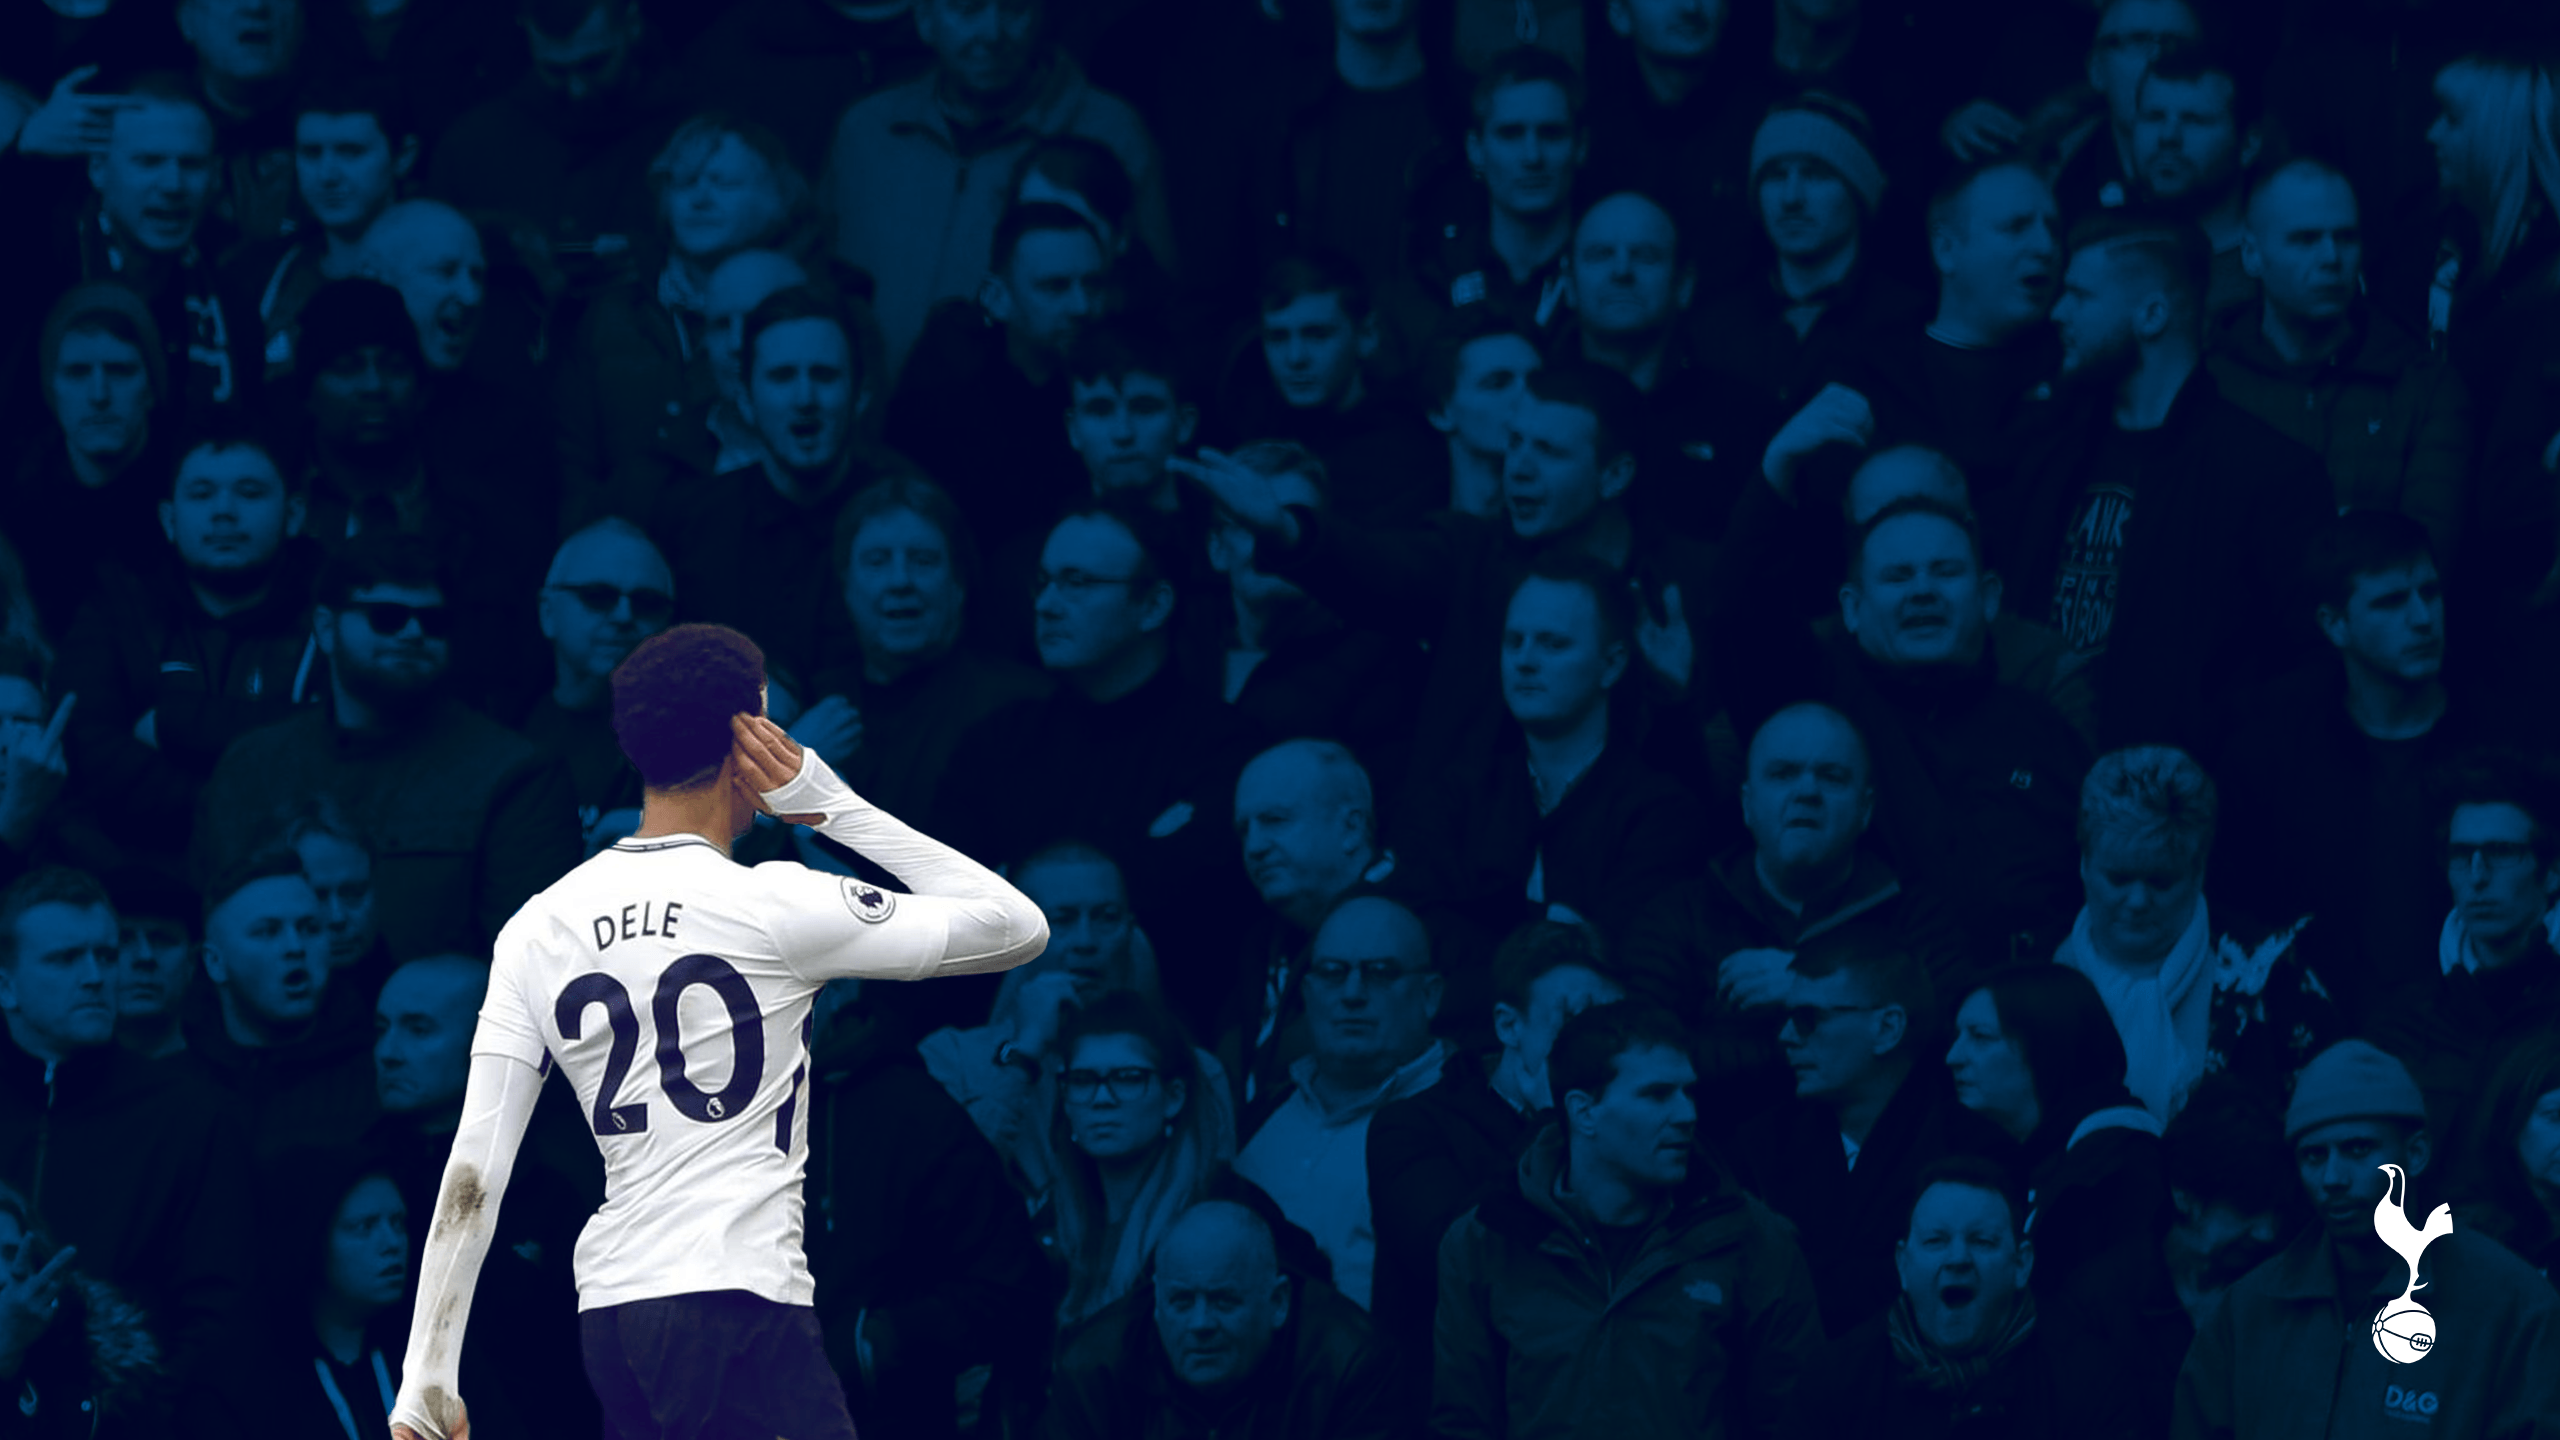 New Spurs Wallpaper (REQUESTED) Dele Celebrates infront of Chelsea